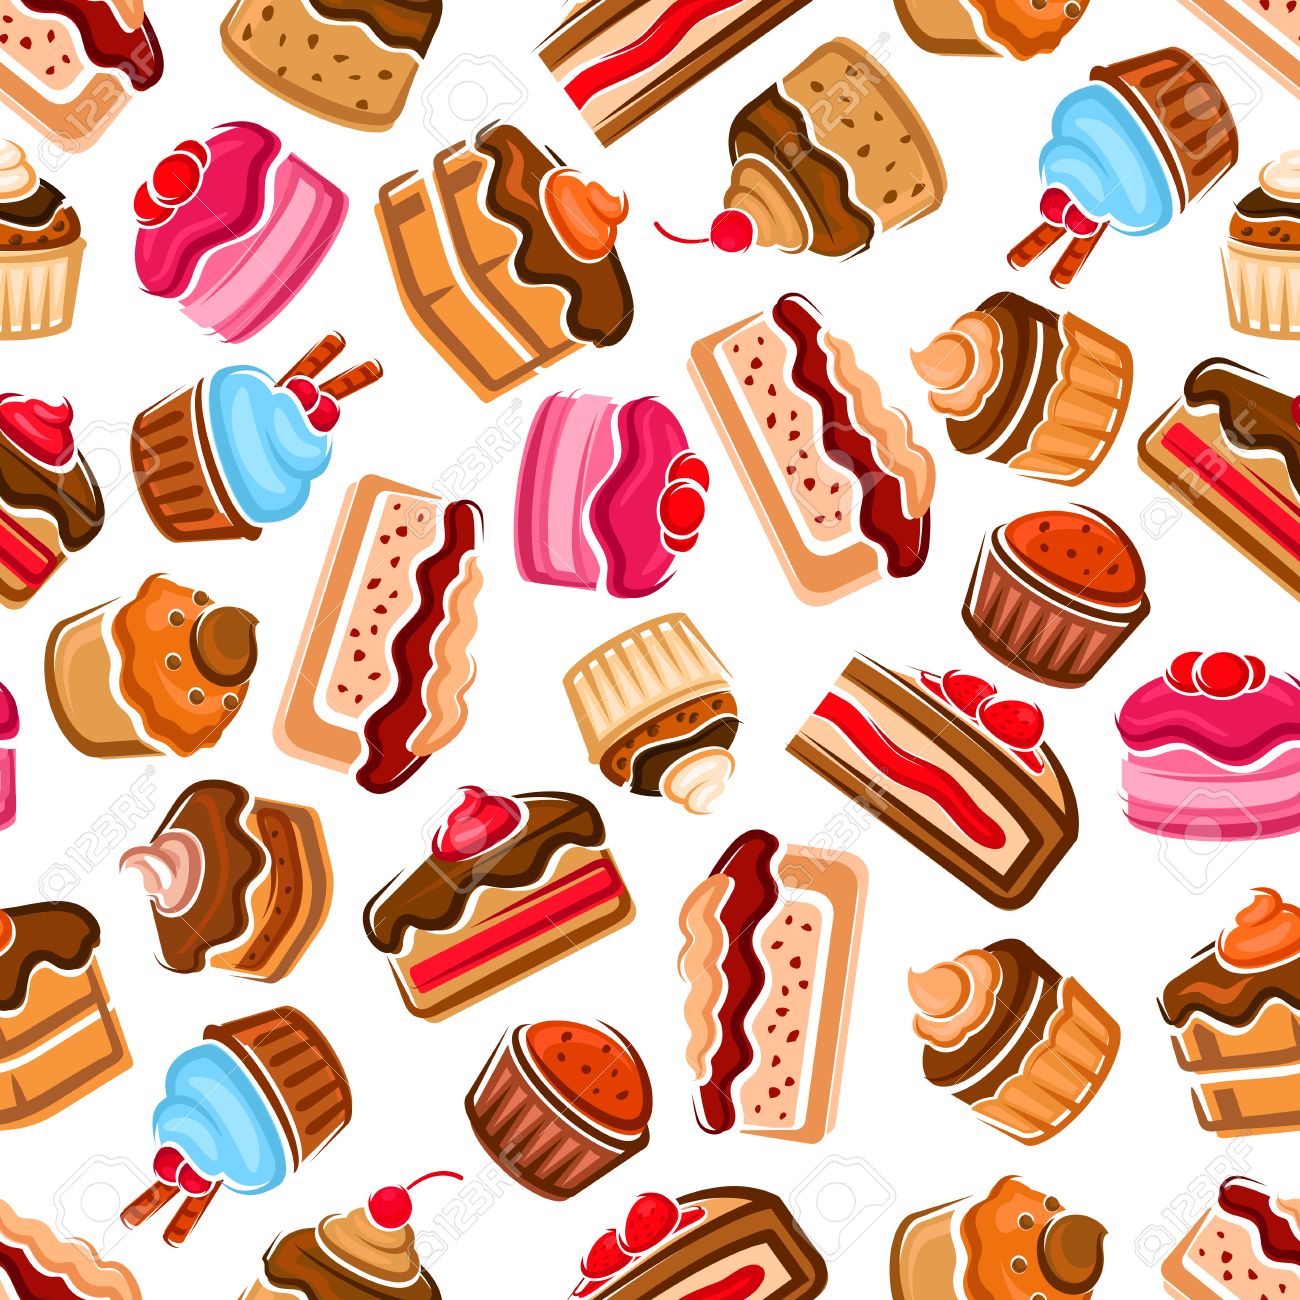 Desserts And Sweets Seamless Background Wallpaper With Vector